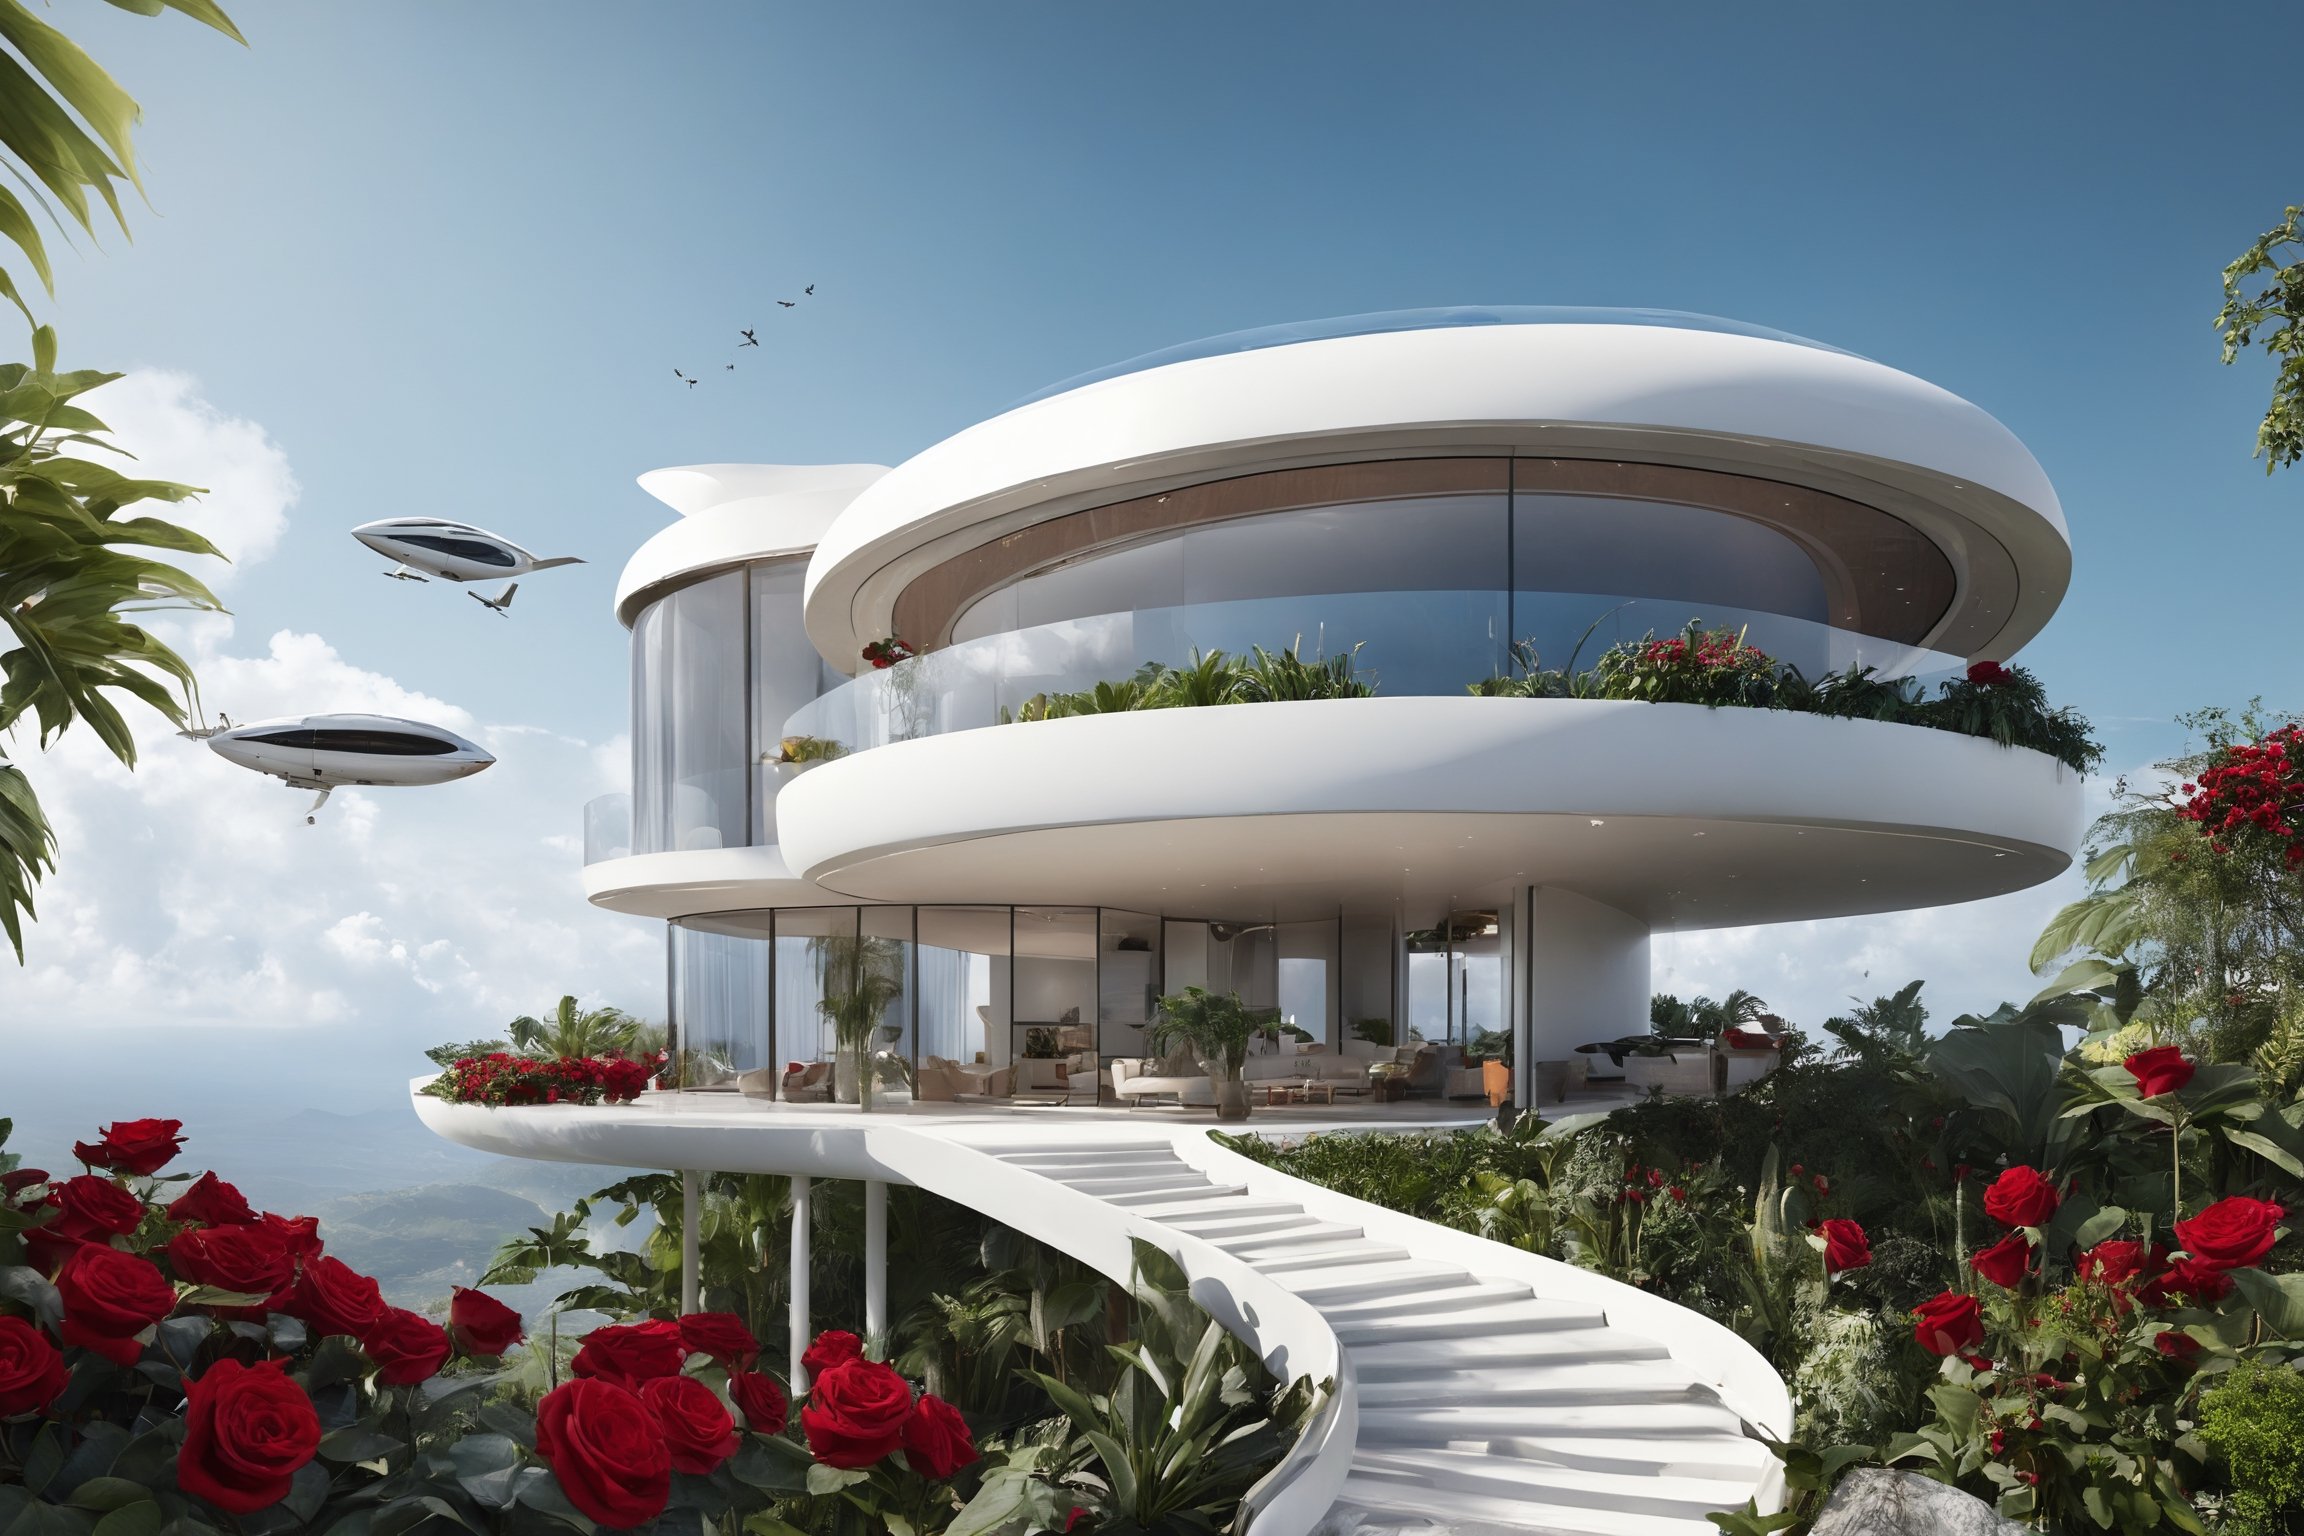 modern ellipse, large vertical ellipse house that's floating in the clouds, tropical plants, house, white color, floating steps rise up to the front door, round windows, oval shaped door, a large balcony incircles the house and flower pots with red roses are sitting on the balcony, a porch incircles the house, building, outdoors, a landing pad for flying vehicles, no humans, day, sky, epic, futuristic, fantastic, future, fantasy, science fiction, hyper-realism, realistic, masterpiece, intricate details, best quality, highest detail, professional photography, detailed background, depth of field, insane details, intricate, aesthetic, photorealistic, extreme depth of field, Ultra HD, HDR, DTM, 8K
